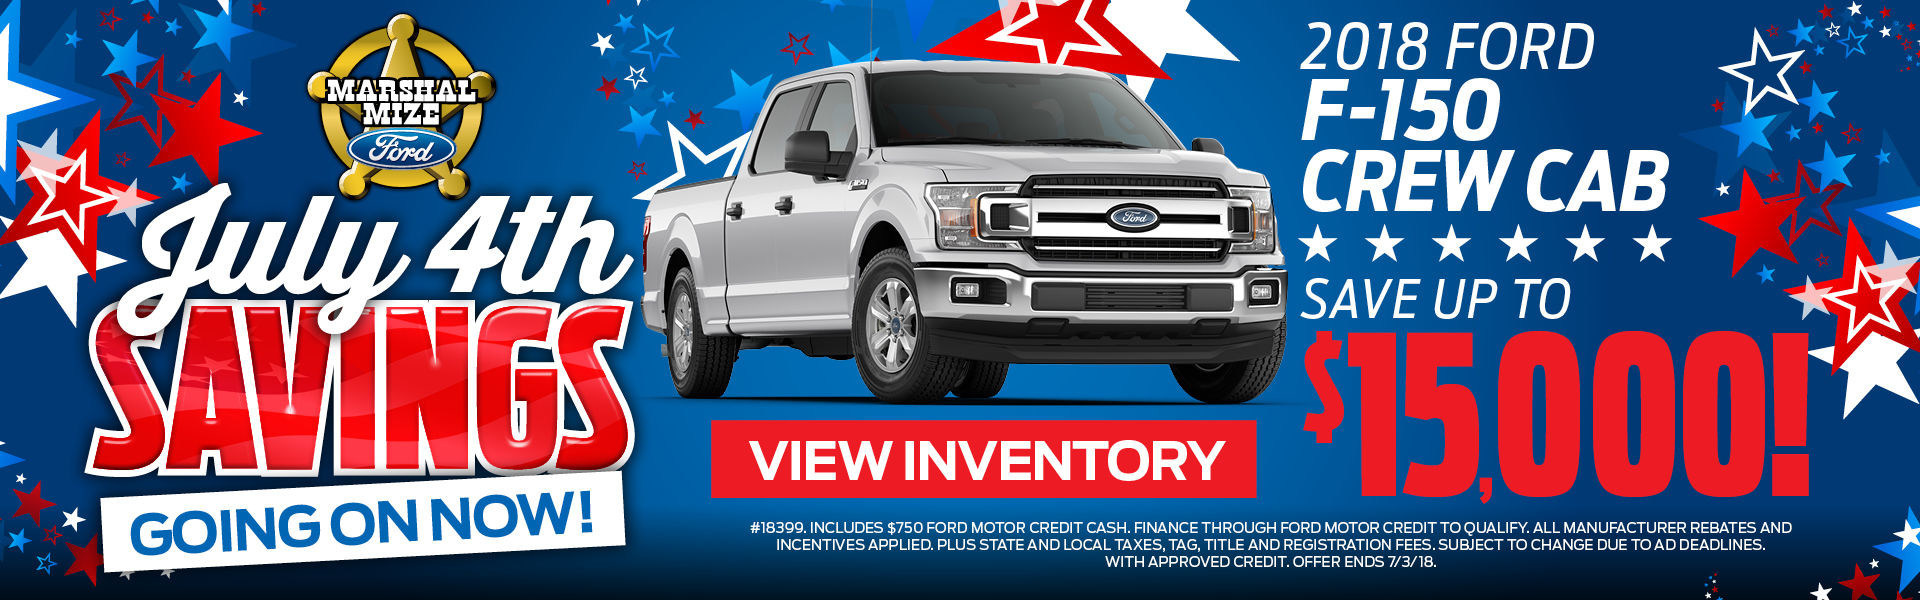 Marshal Mize Ford Celebrates The 4th Of July With Budgetfriendly